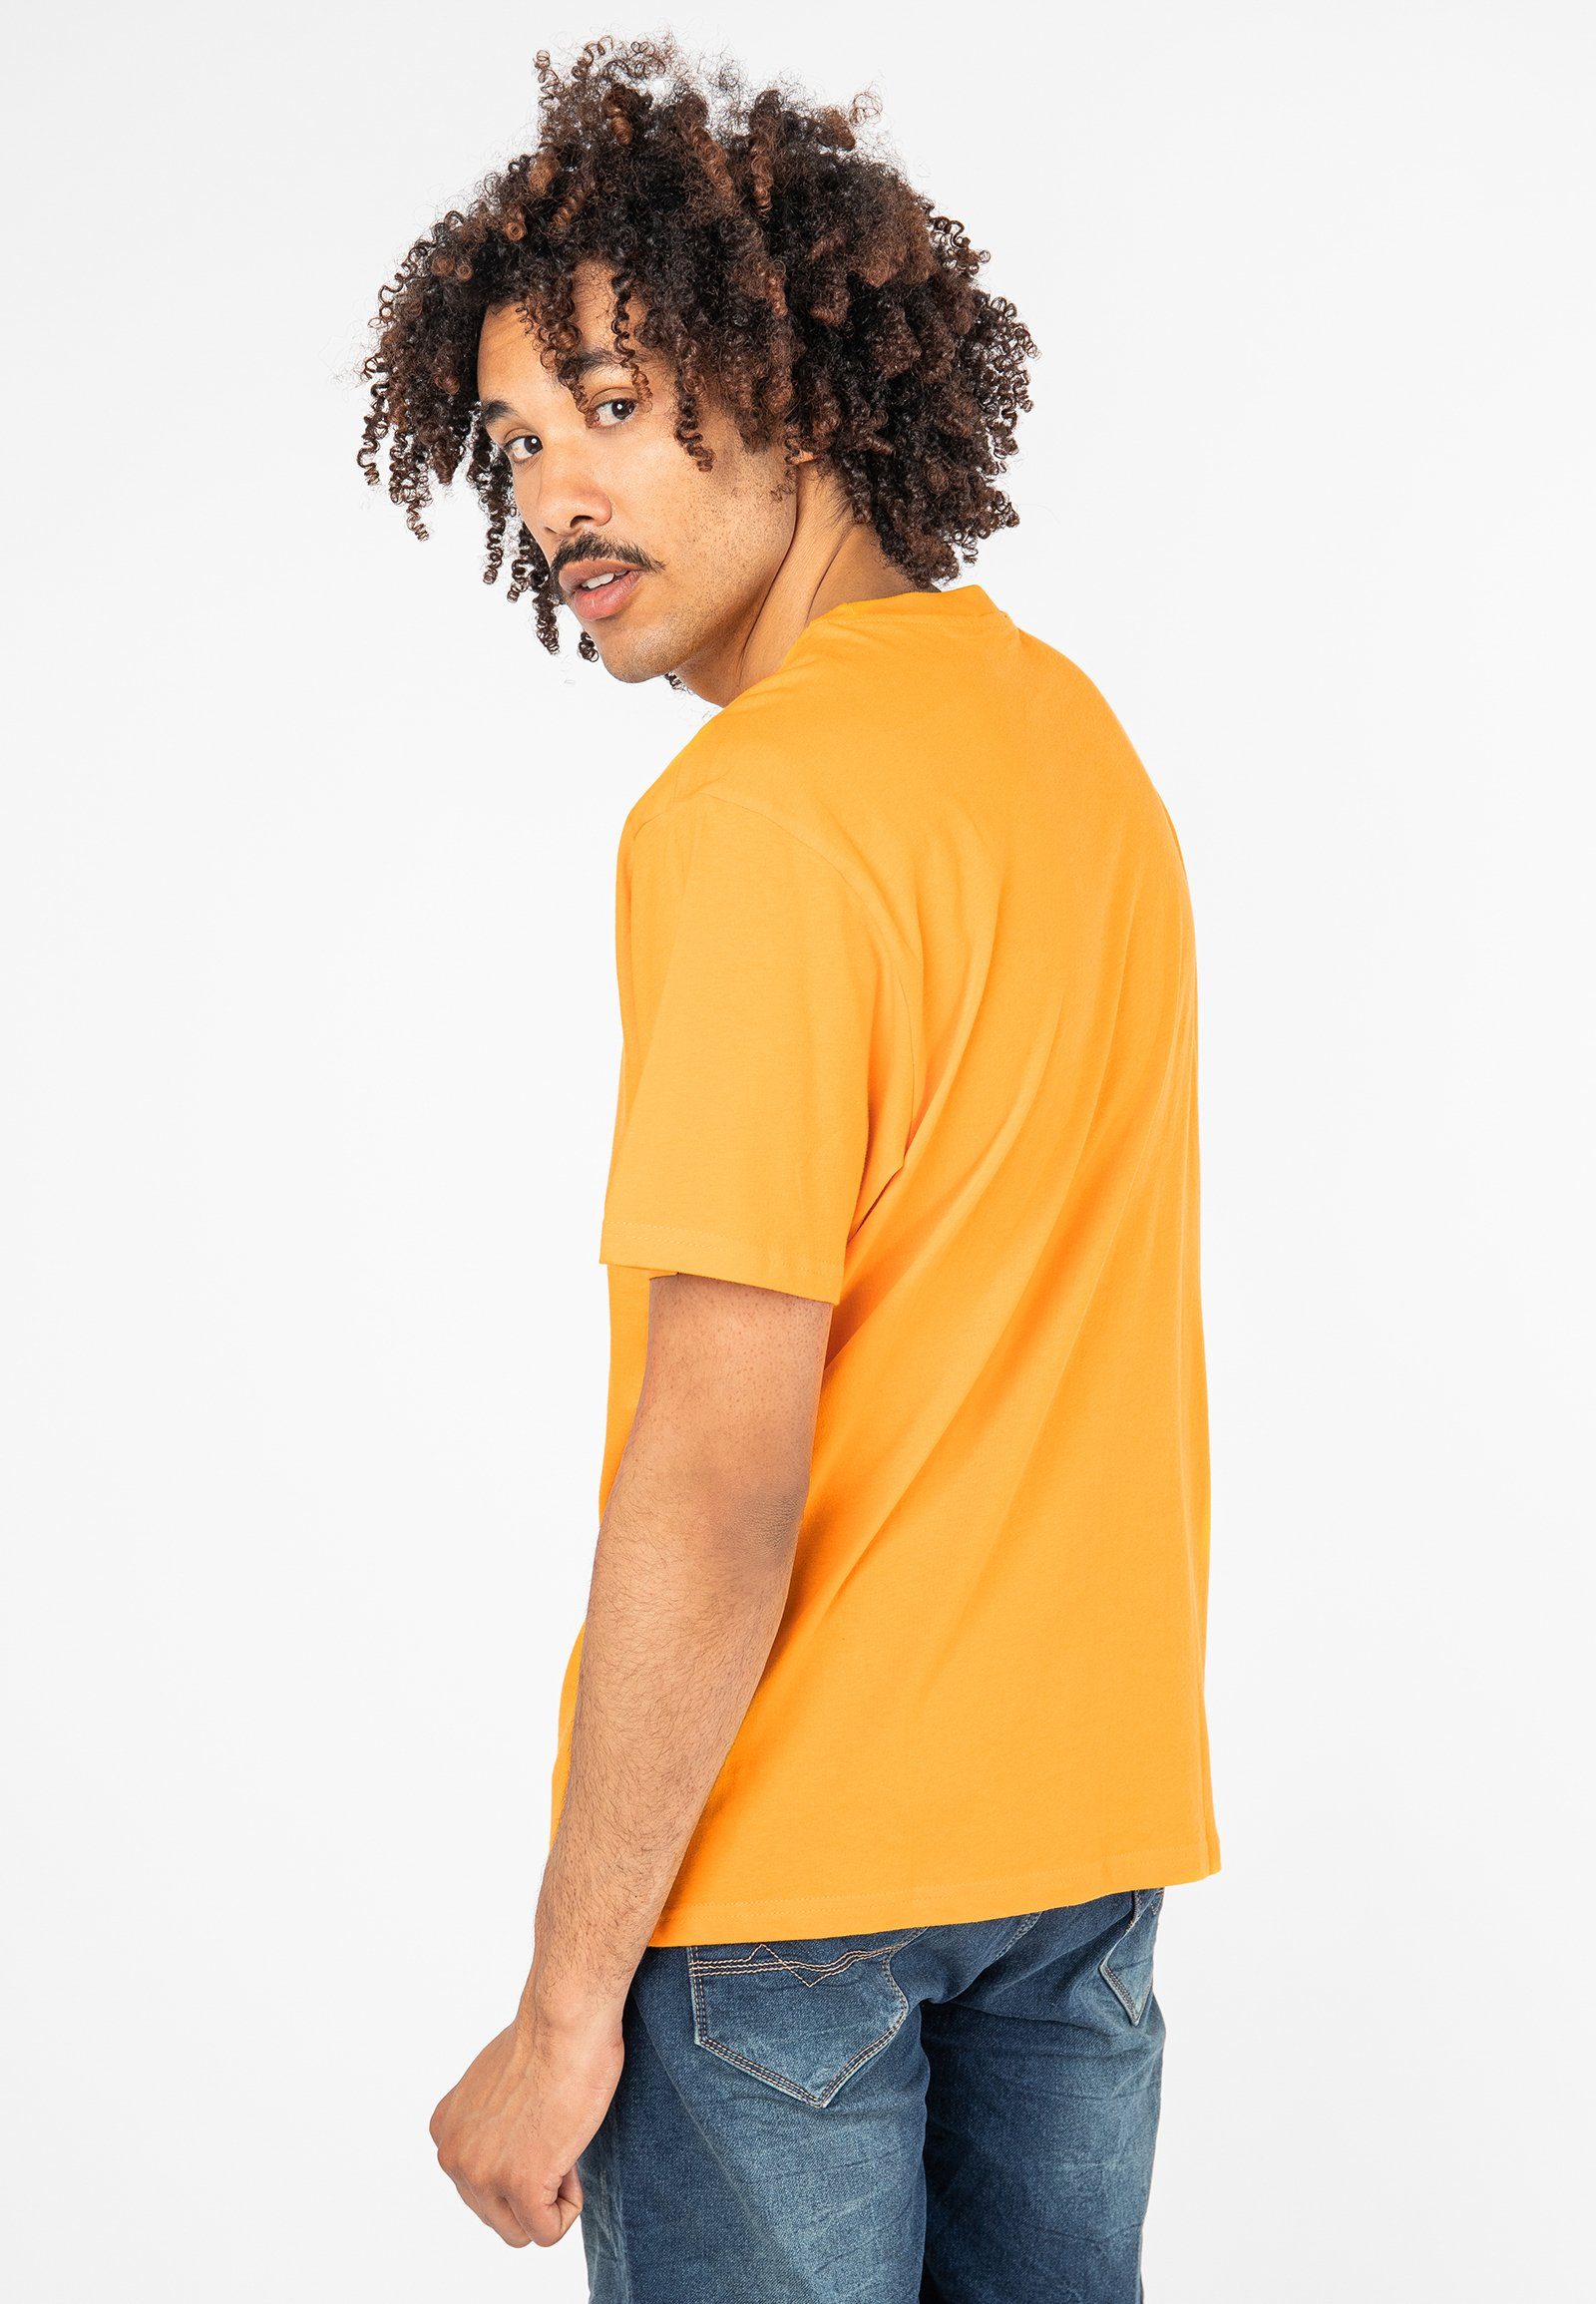 SUBLEVEL T-Shirt Print yellow mit T-Shirt Sommer